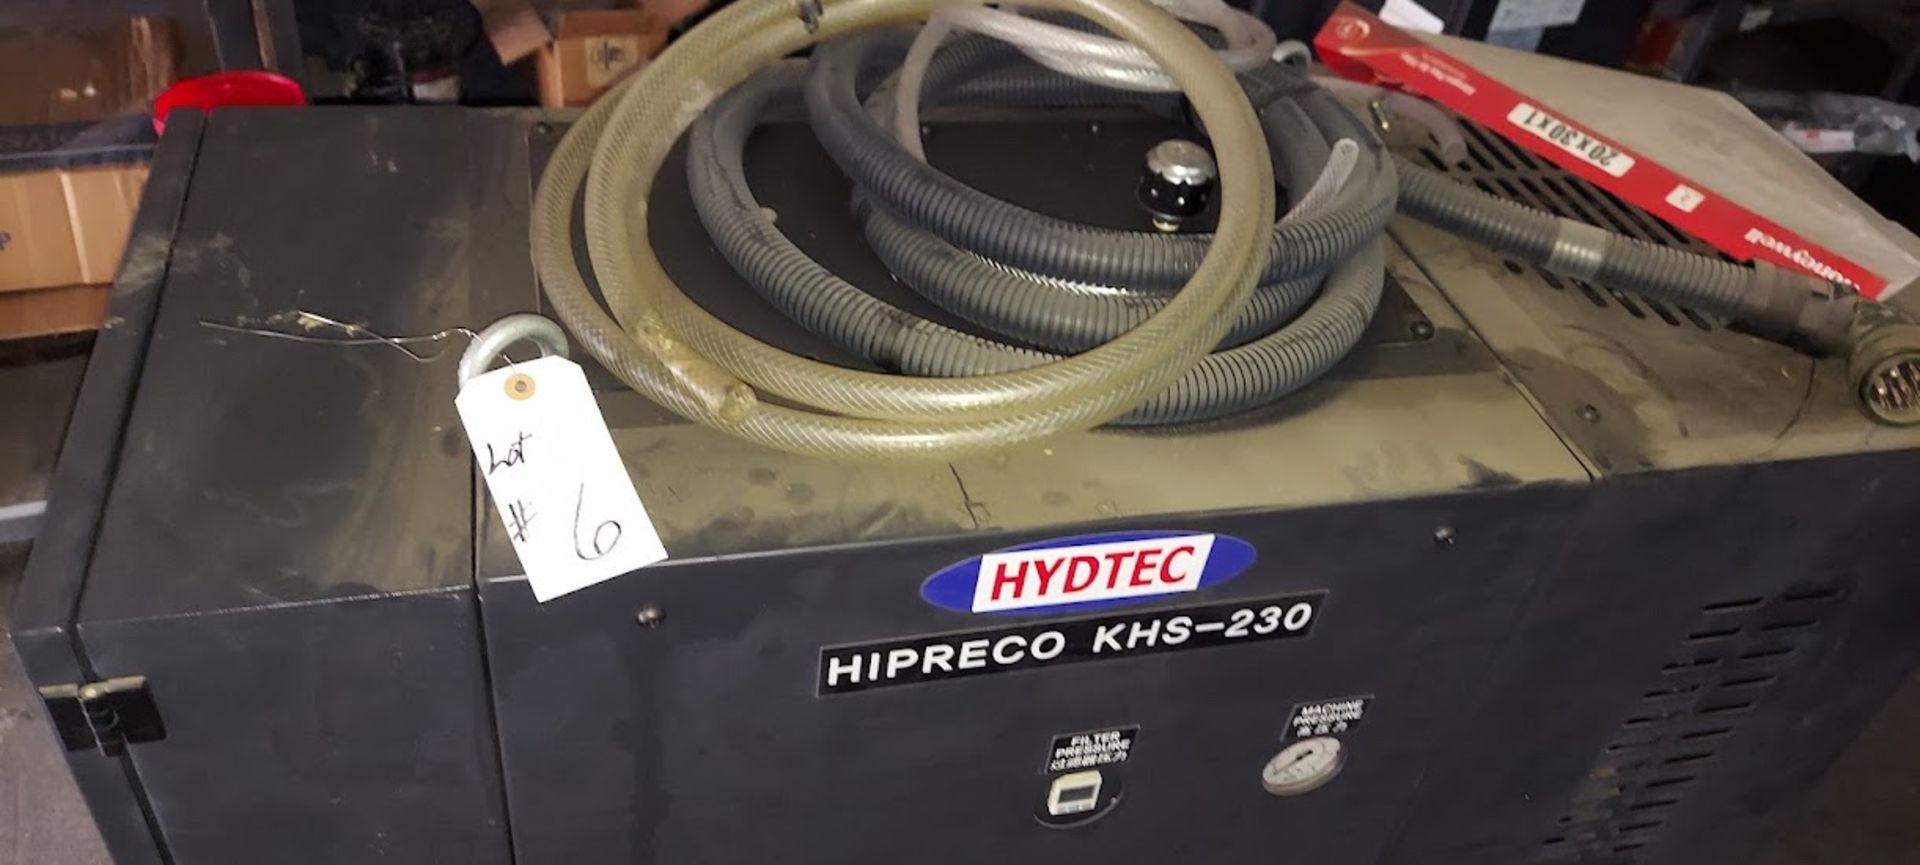 HIPRECO High Pressure Coolant Pump, Model KHS-230, new - never used - Image 2 of 5